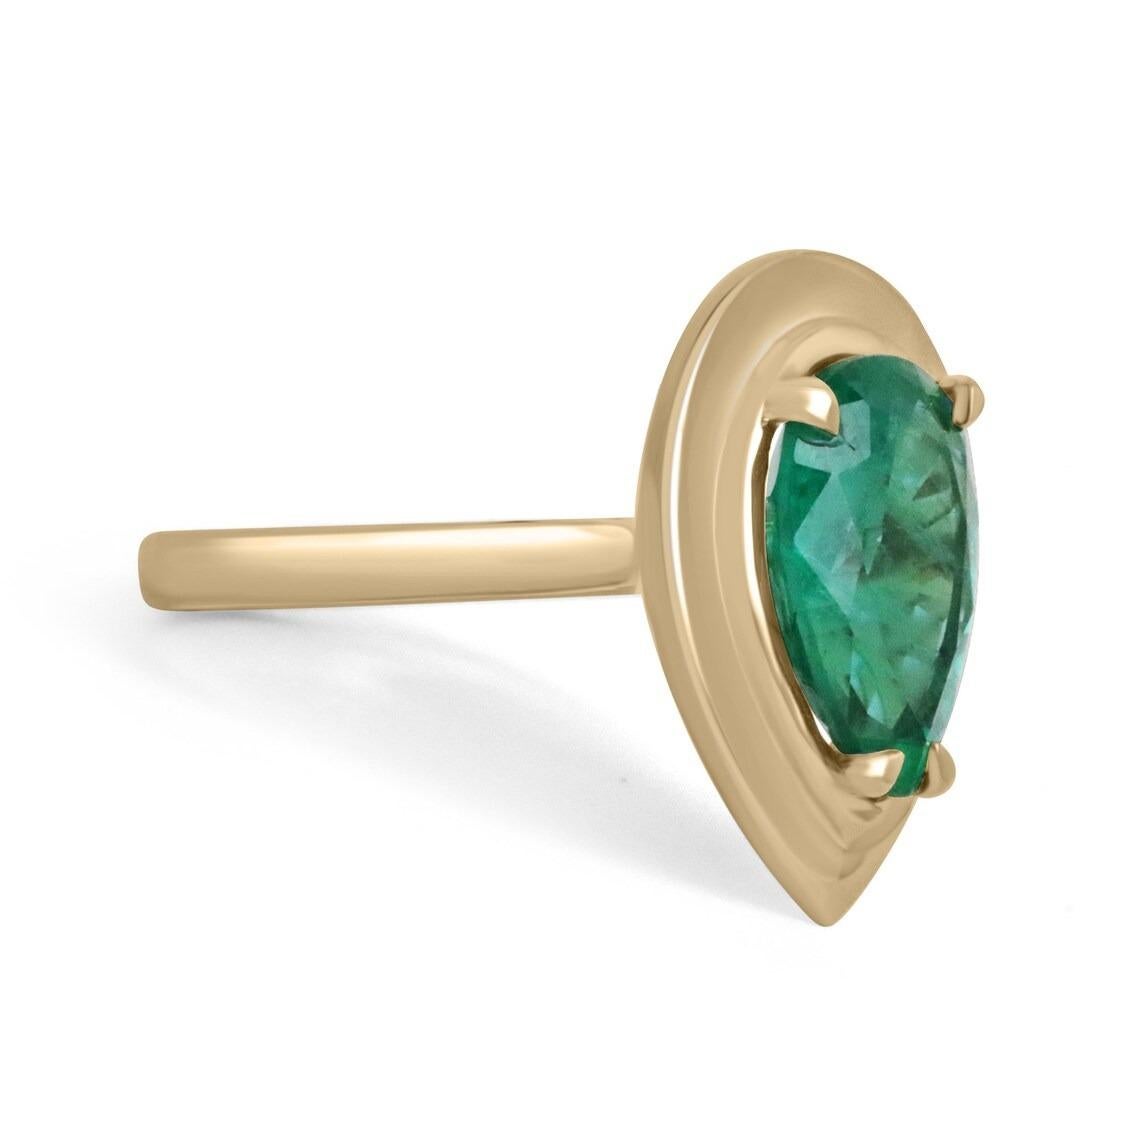 Displayed is a dark green emerald prong set, teardrop solitaire ring in 18K gold. This gorgeous solitaire ring carries a full 3.10-carat emerald that has ideal color and very good eye clarity. Minor imperfections are normal as this emerald is a